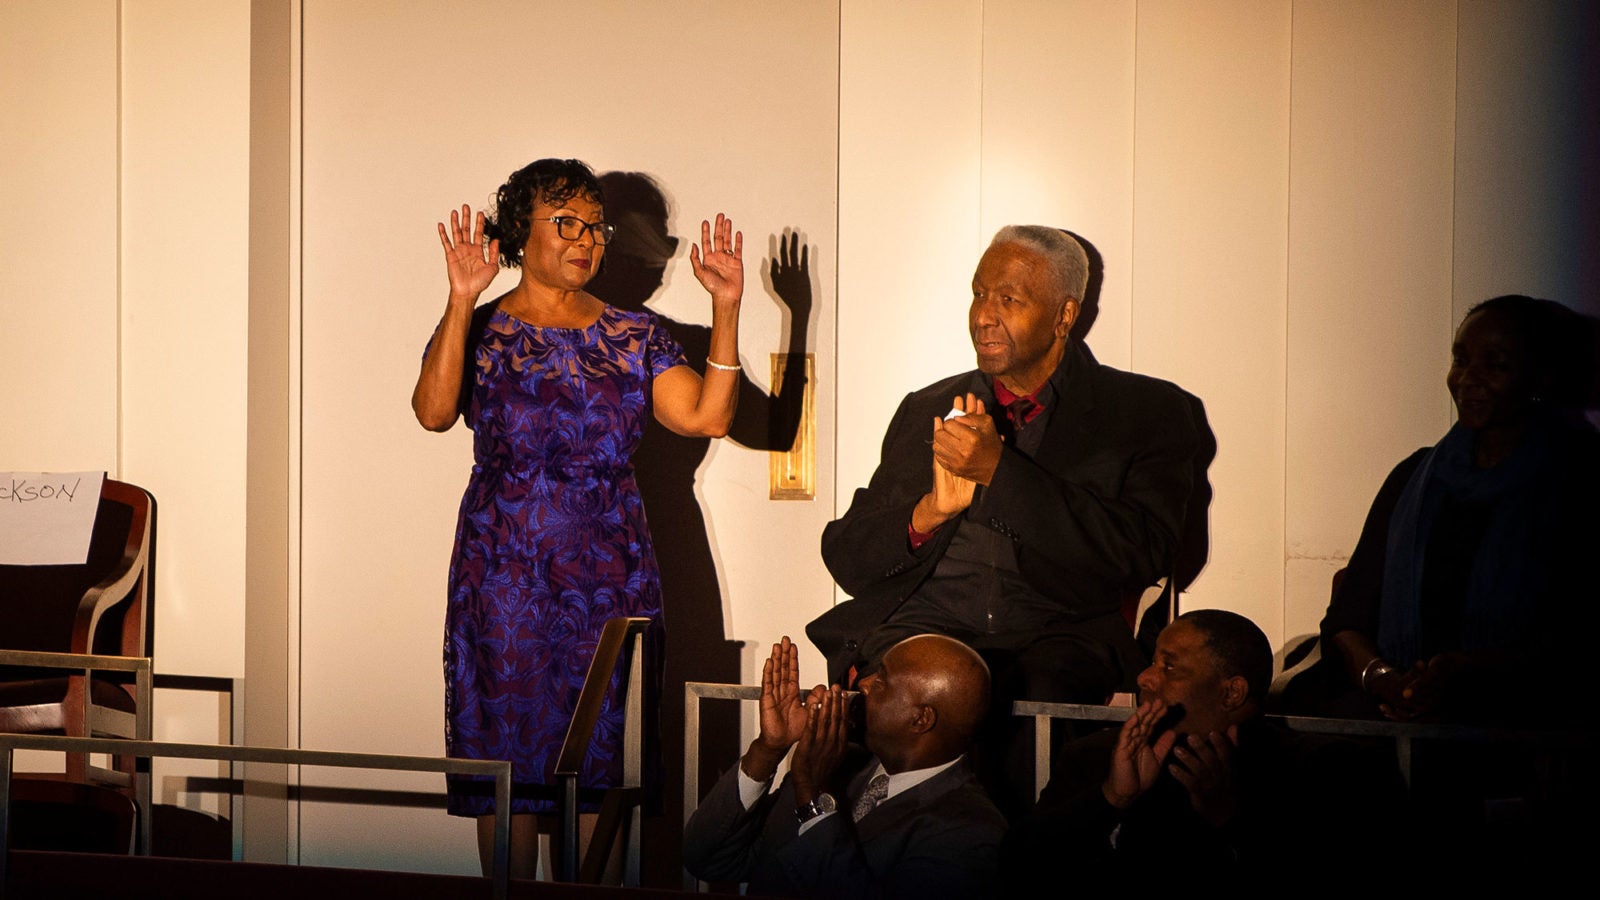 Sandra Jackson stands up with her hands up in celebration alongside a seated John Thompson Jr.